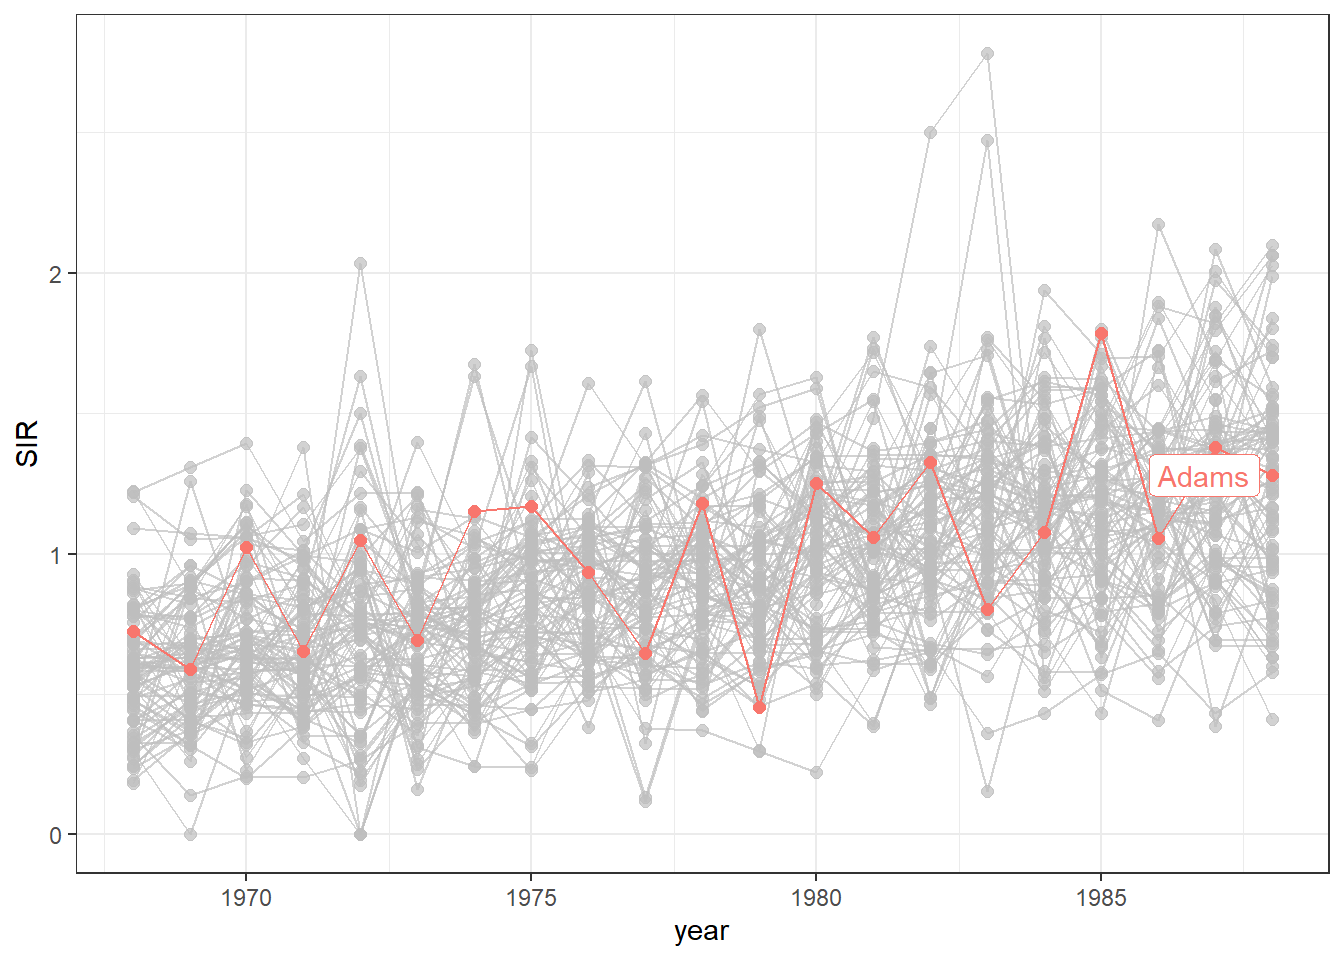 Time plot of lung cancer SIR in Ohio counties from 1968 to 1988 with the time series of the county called Adams highlighted.